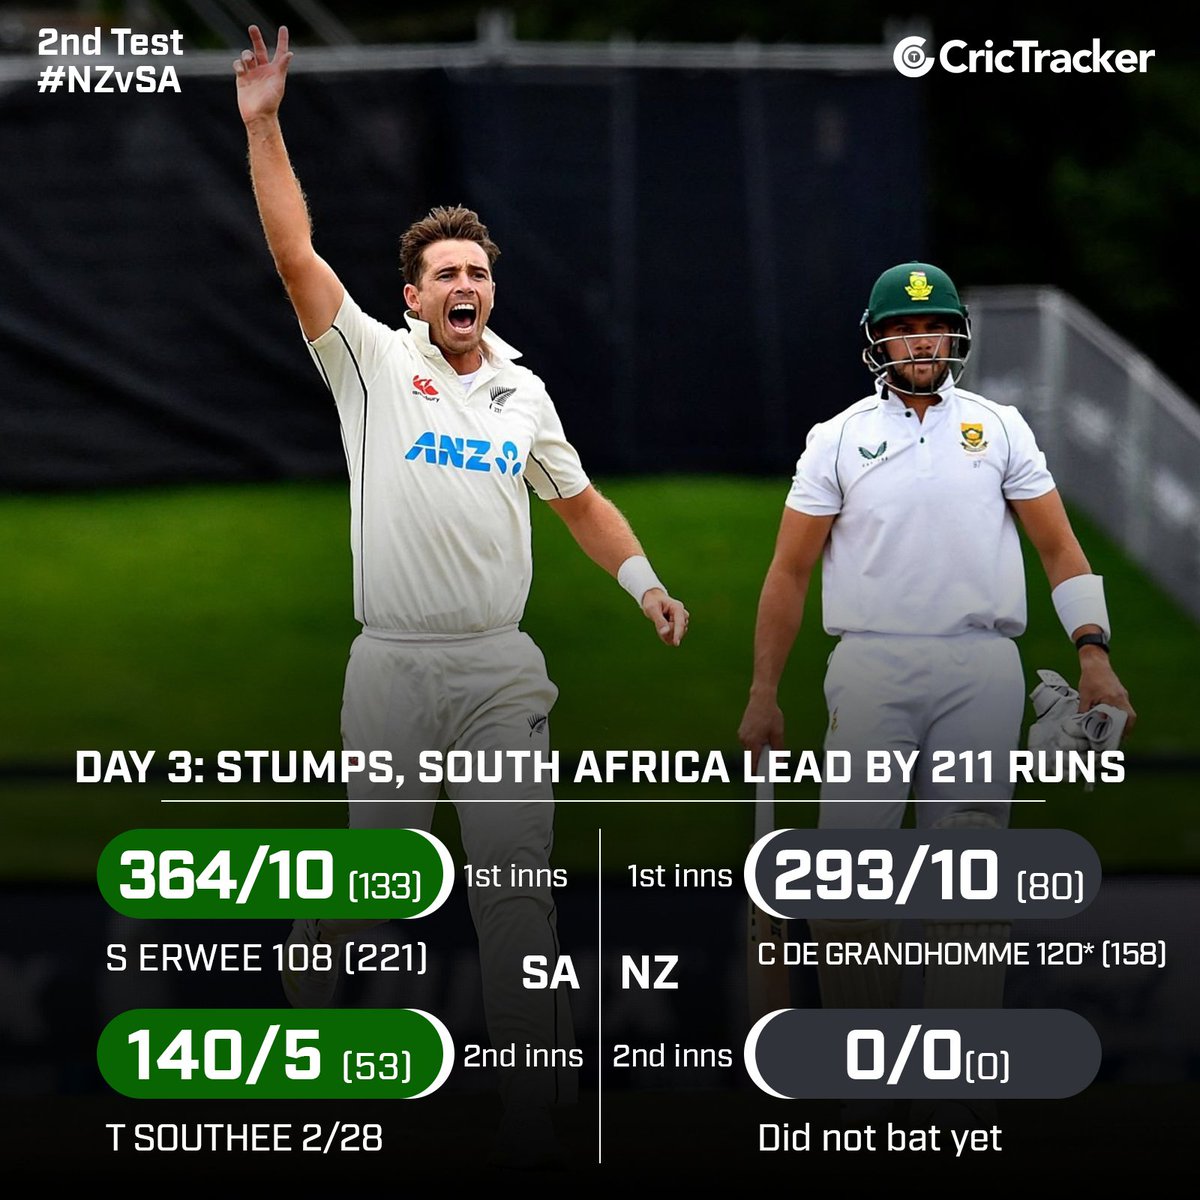 South Africa enjoys a comfortable lead at the end of Day 3. What would be the perfect target to set?

#Cricket #CricTracker #NZvSA #ColindeGrandhomme #kagisoRabada